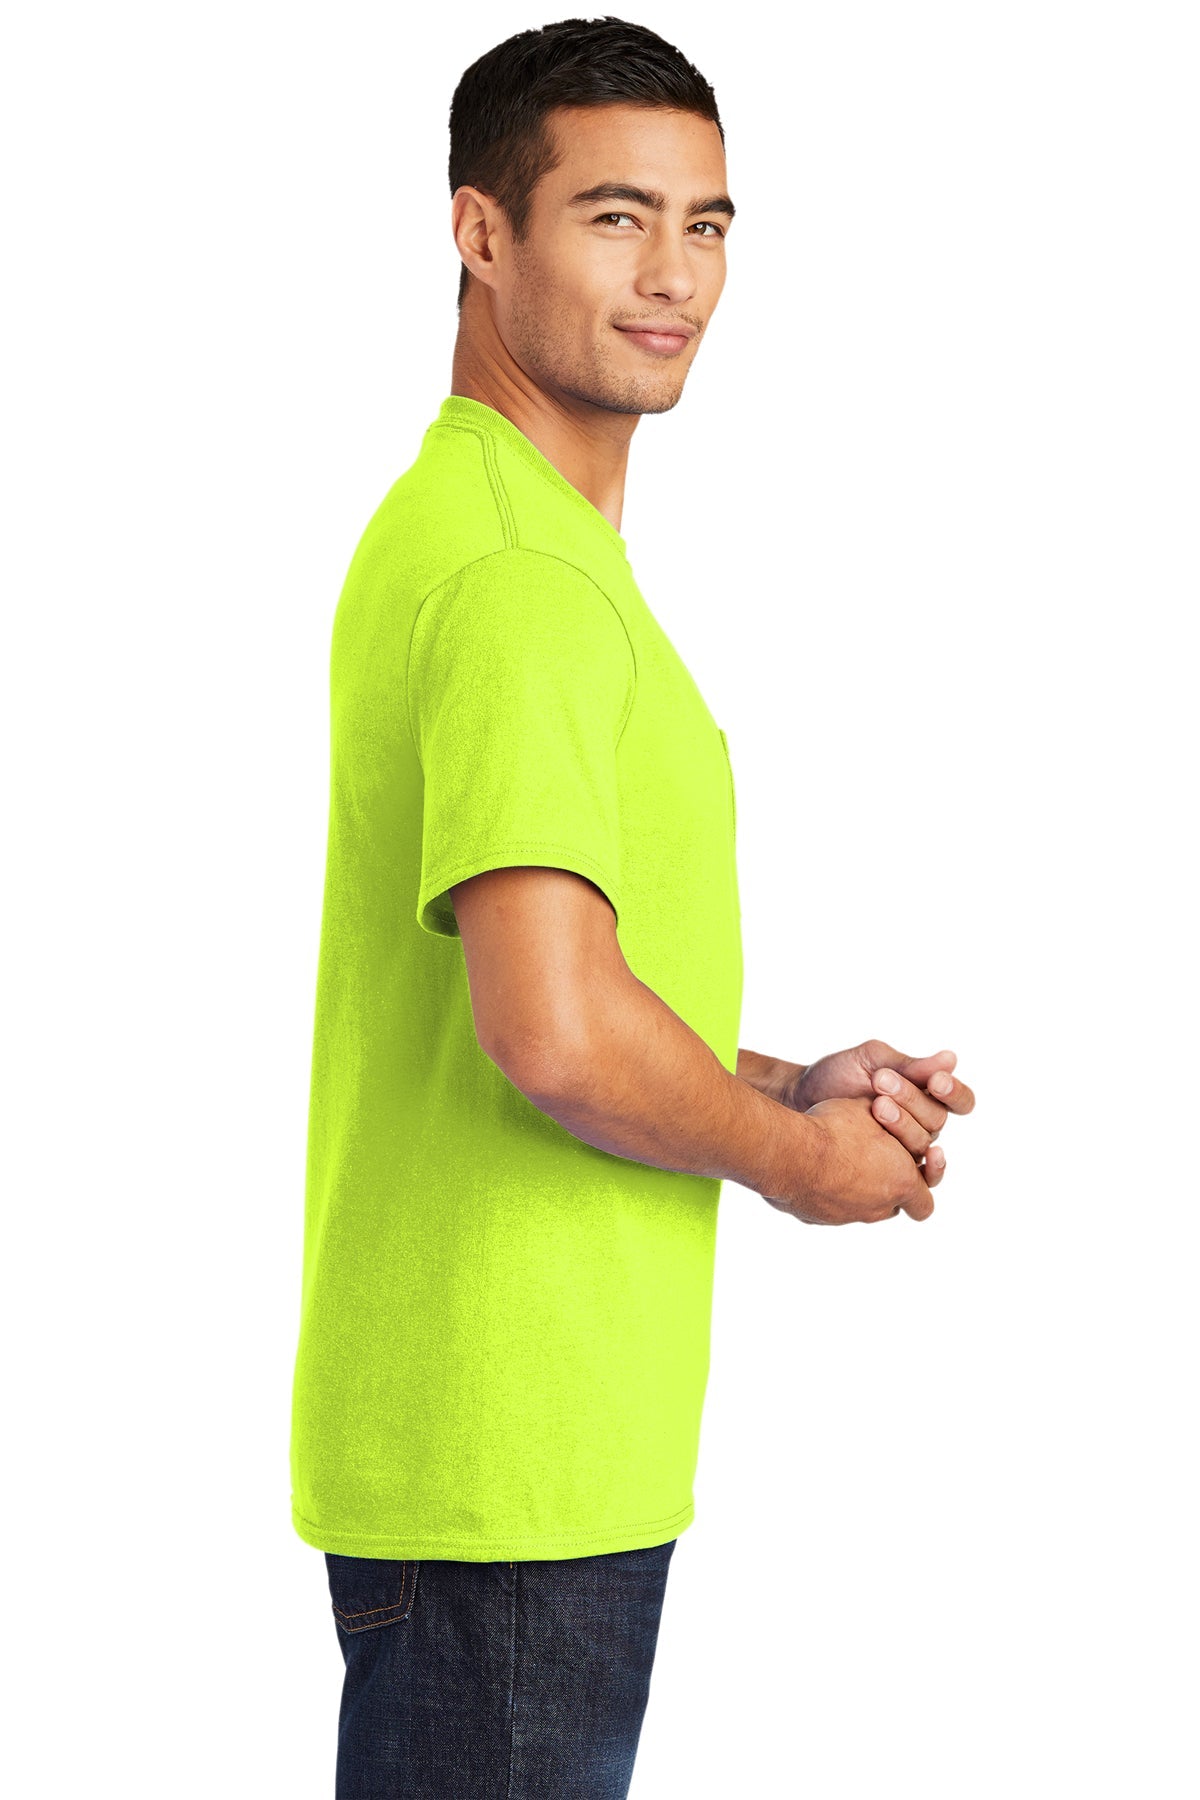 Port & Company Tall Core Blend Customized Pocket Tee's, Safety Green